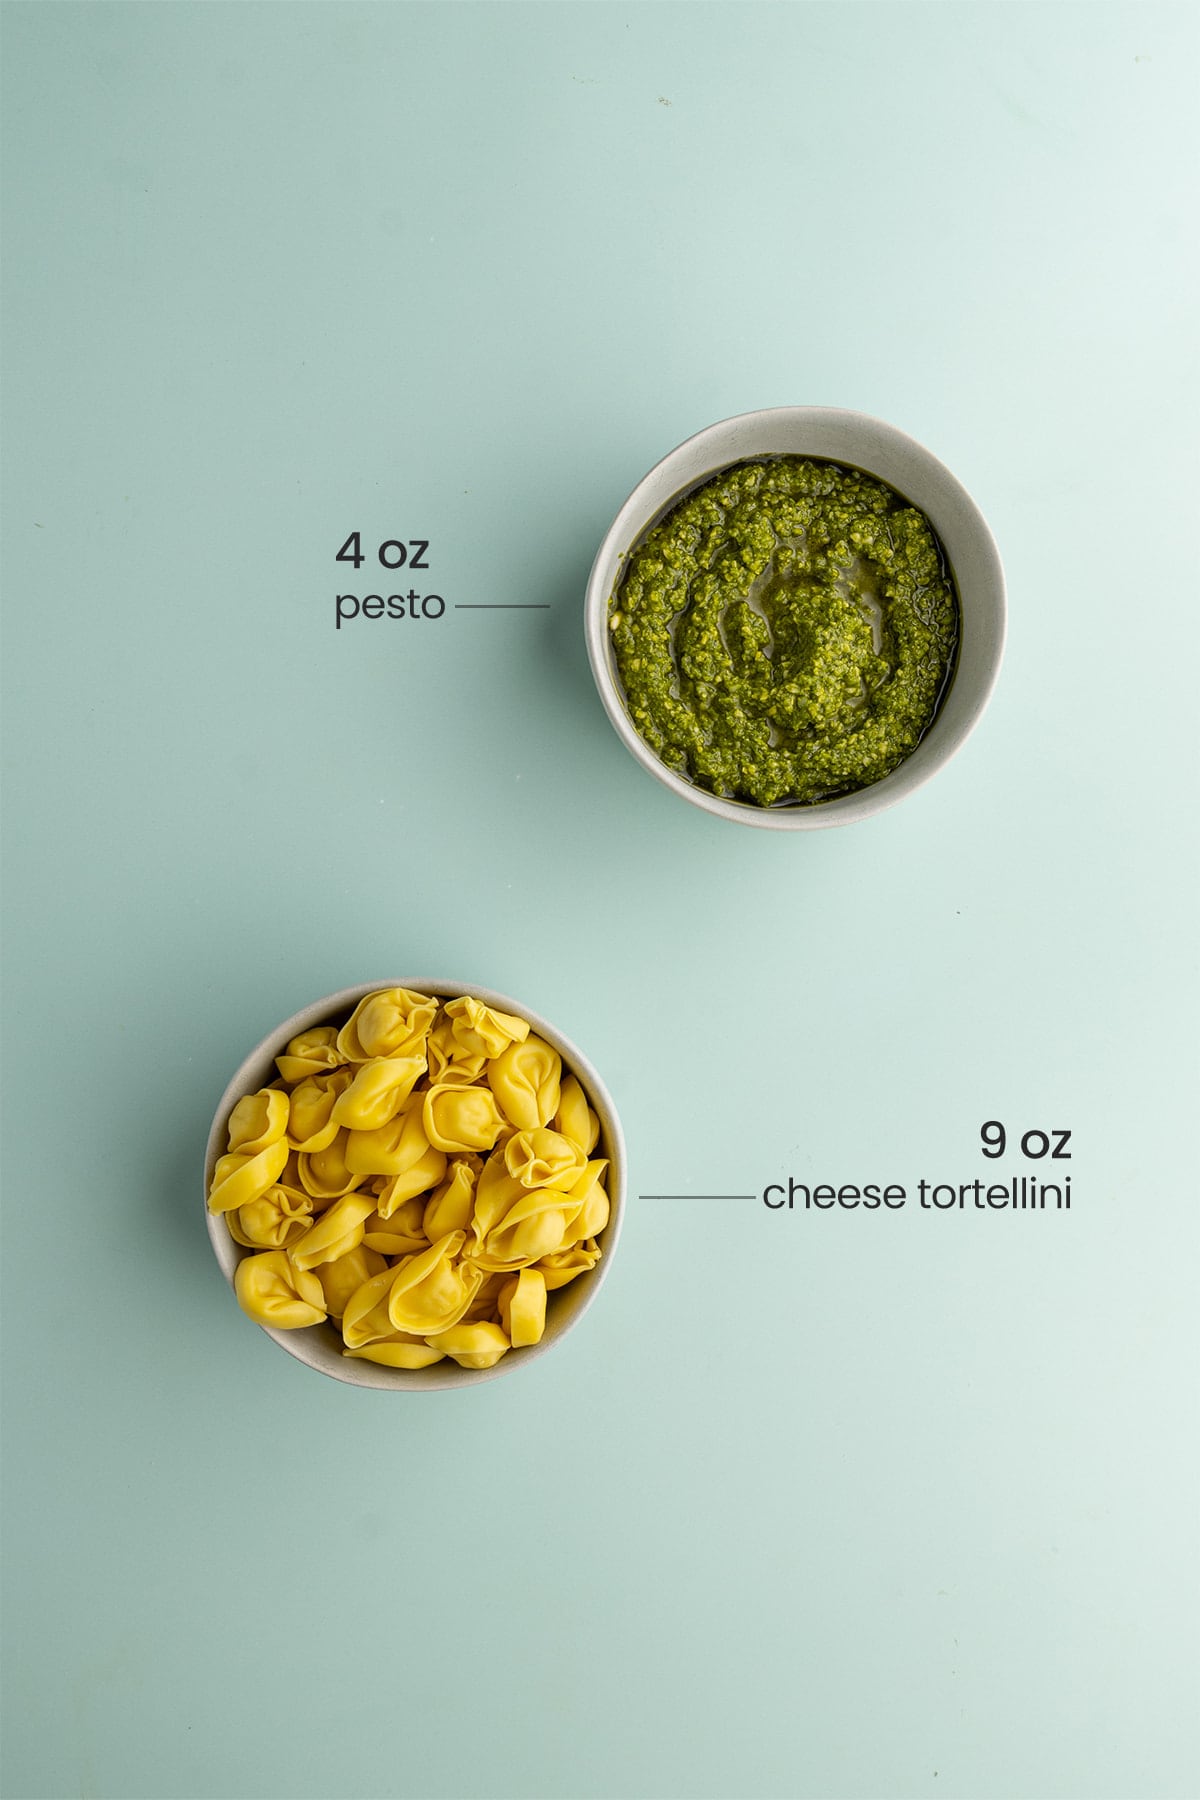 a bowl of uncooked cheese tortellini and a bowl of pesto